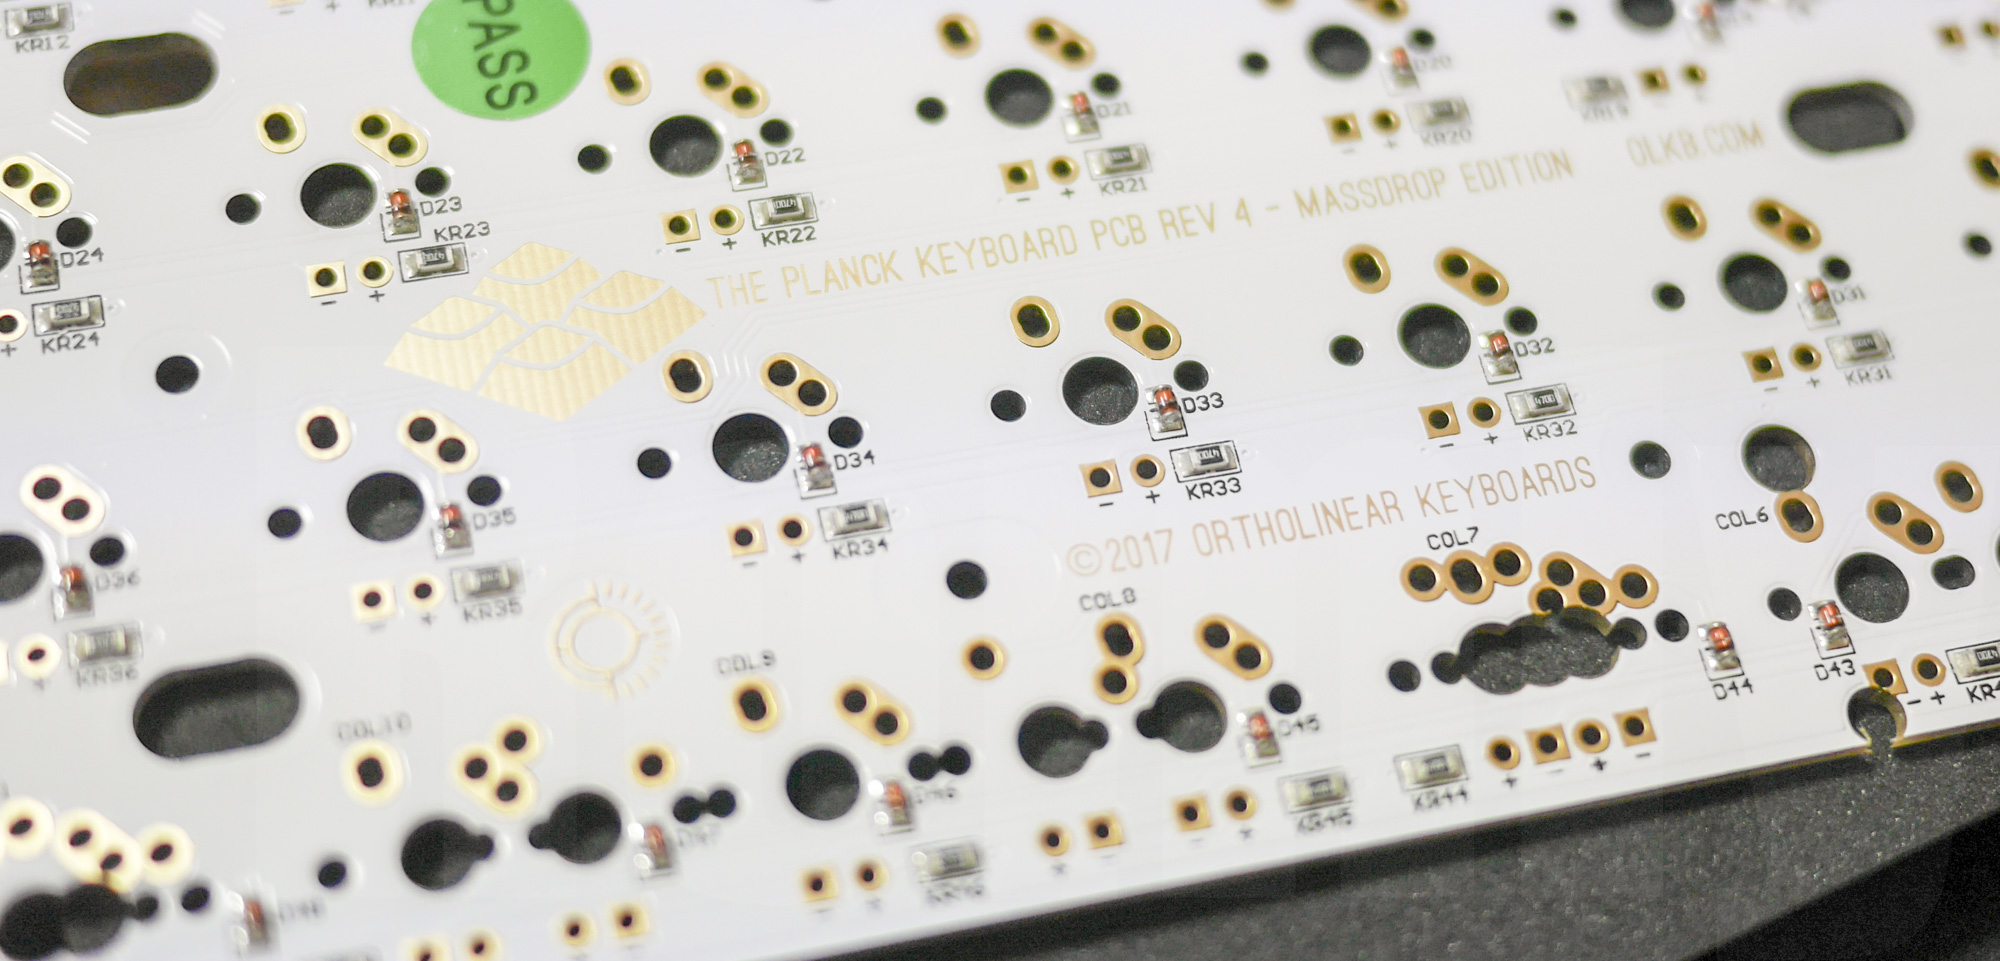 Diodes on Planck PCB